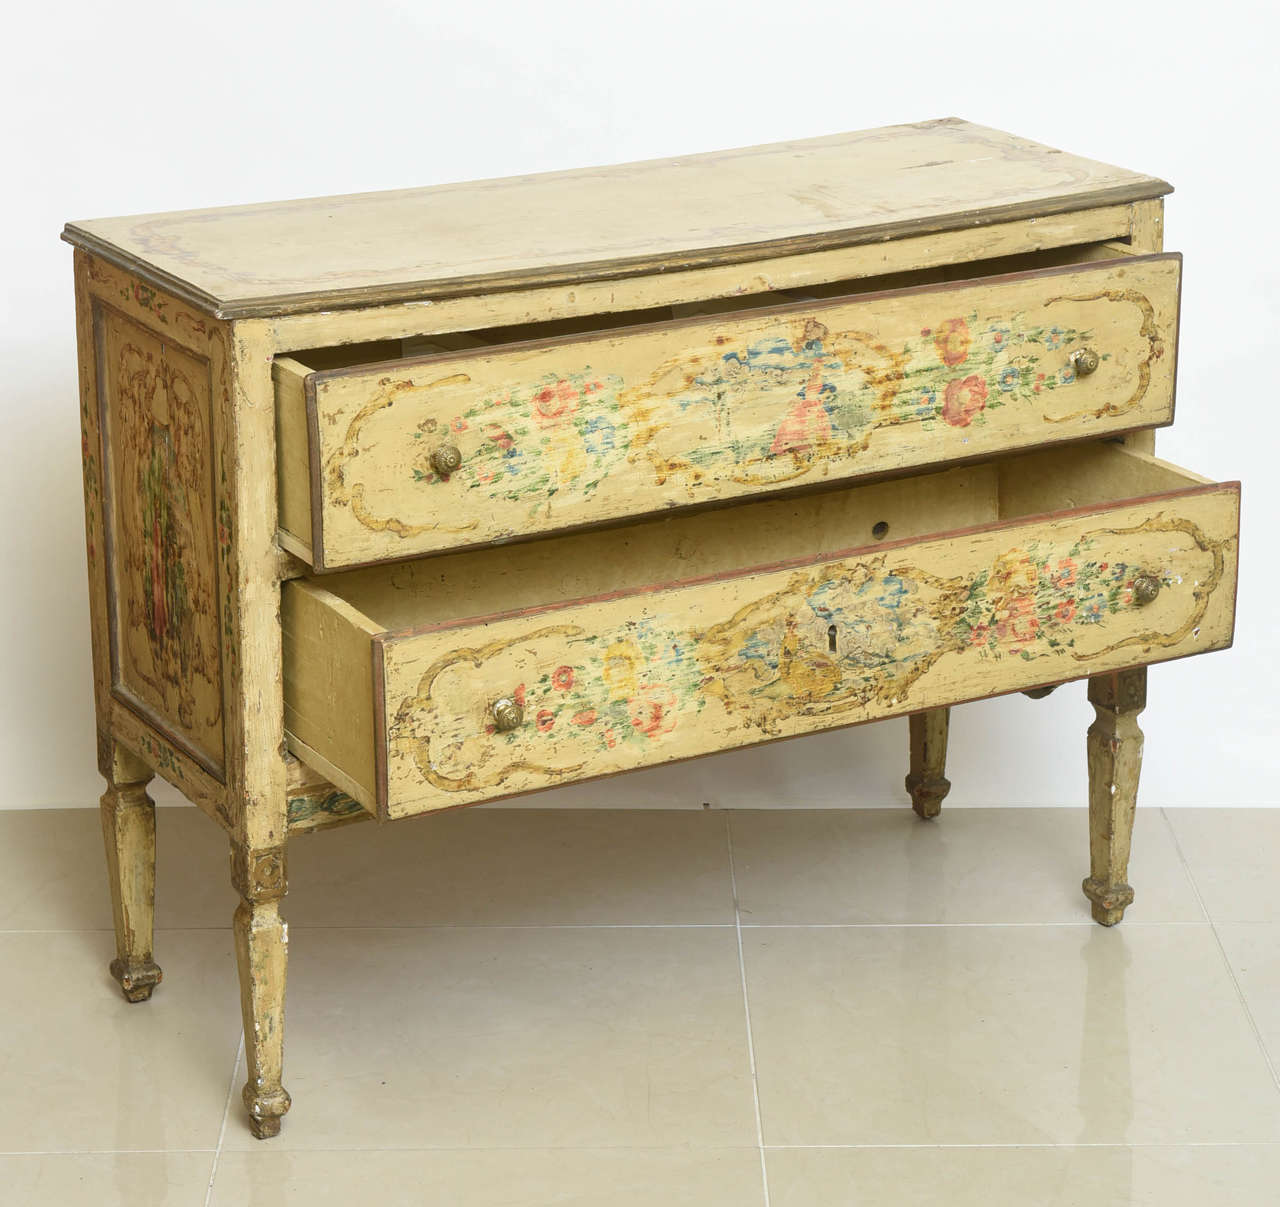 Italian Neoclassic Painted an Parcel-Gilt Two-Drawer Commode, Piedmontese In Excellent Condition For Sale In Hollywood, FL